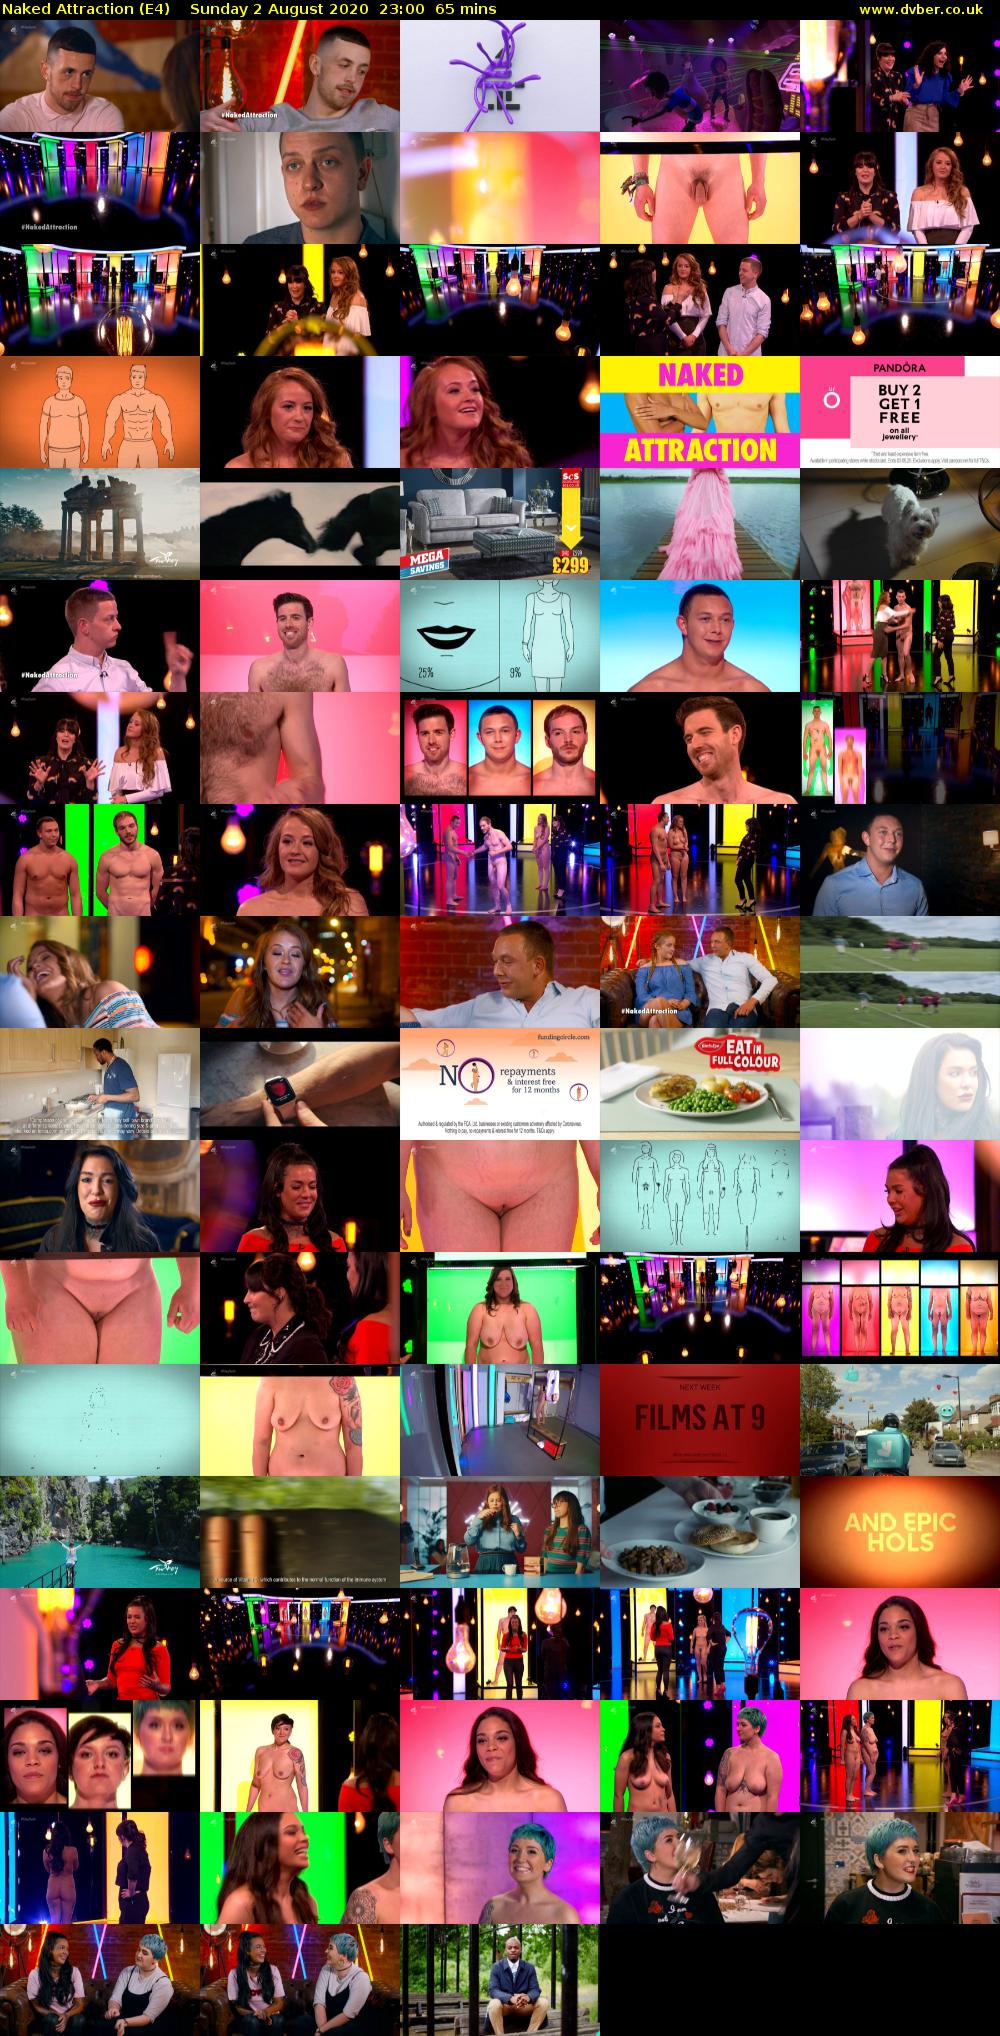 Naked Attraction (E4) Sunday 2 August 2020 23:00 - 00:05